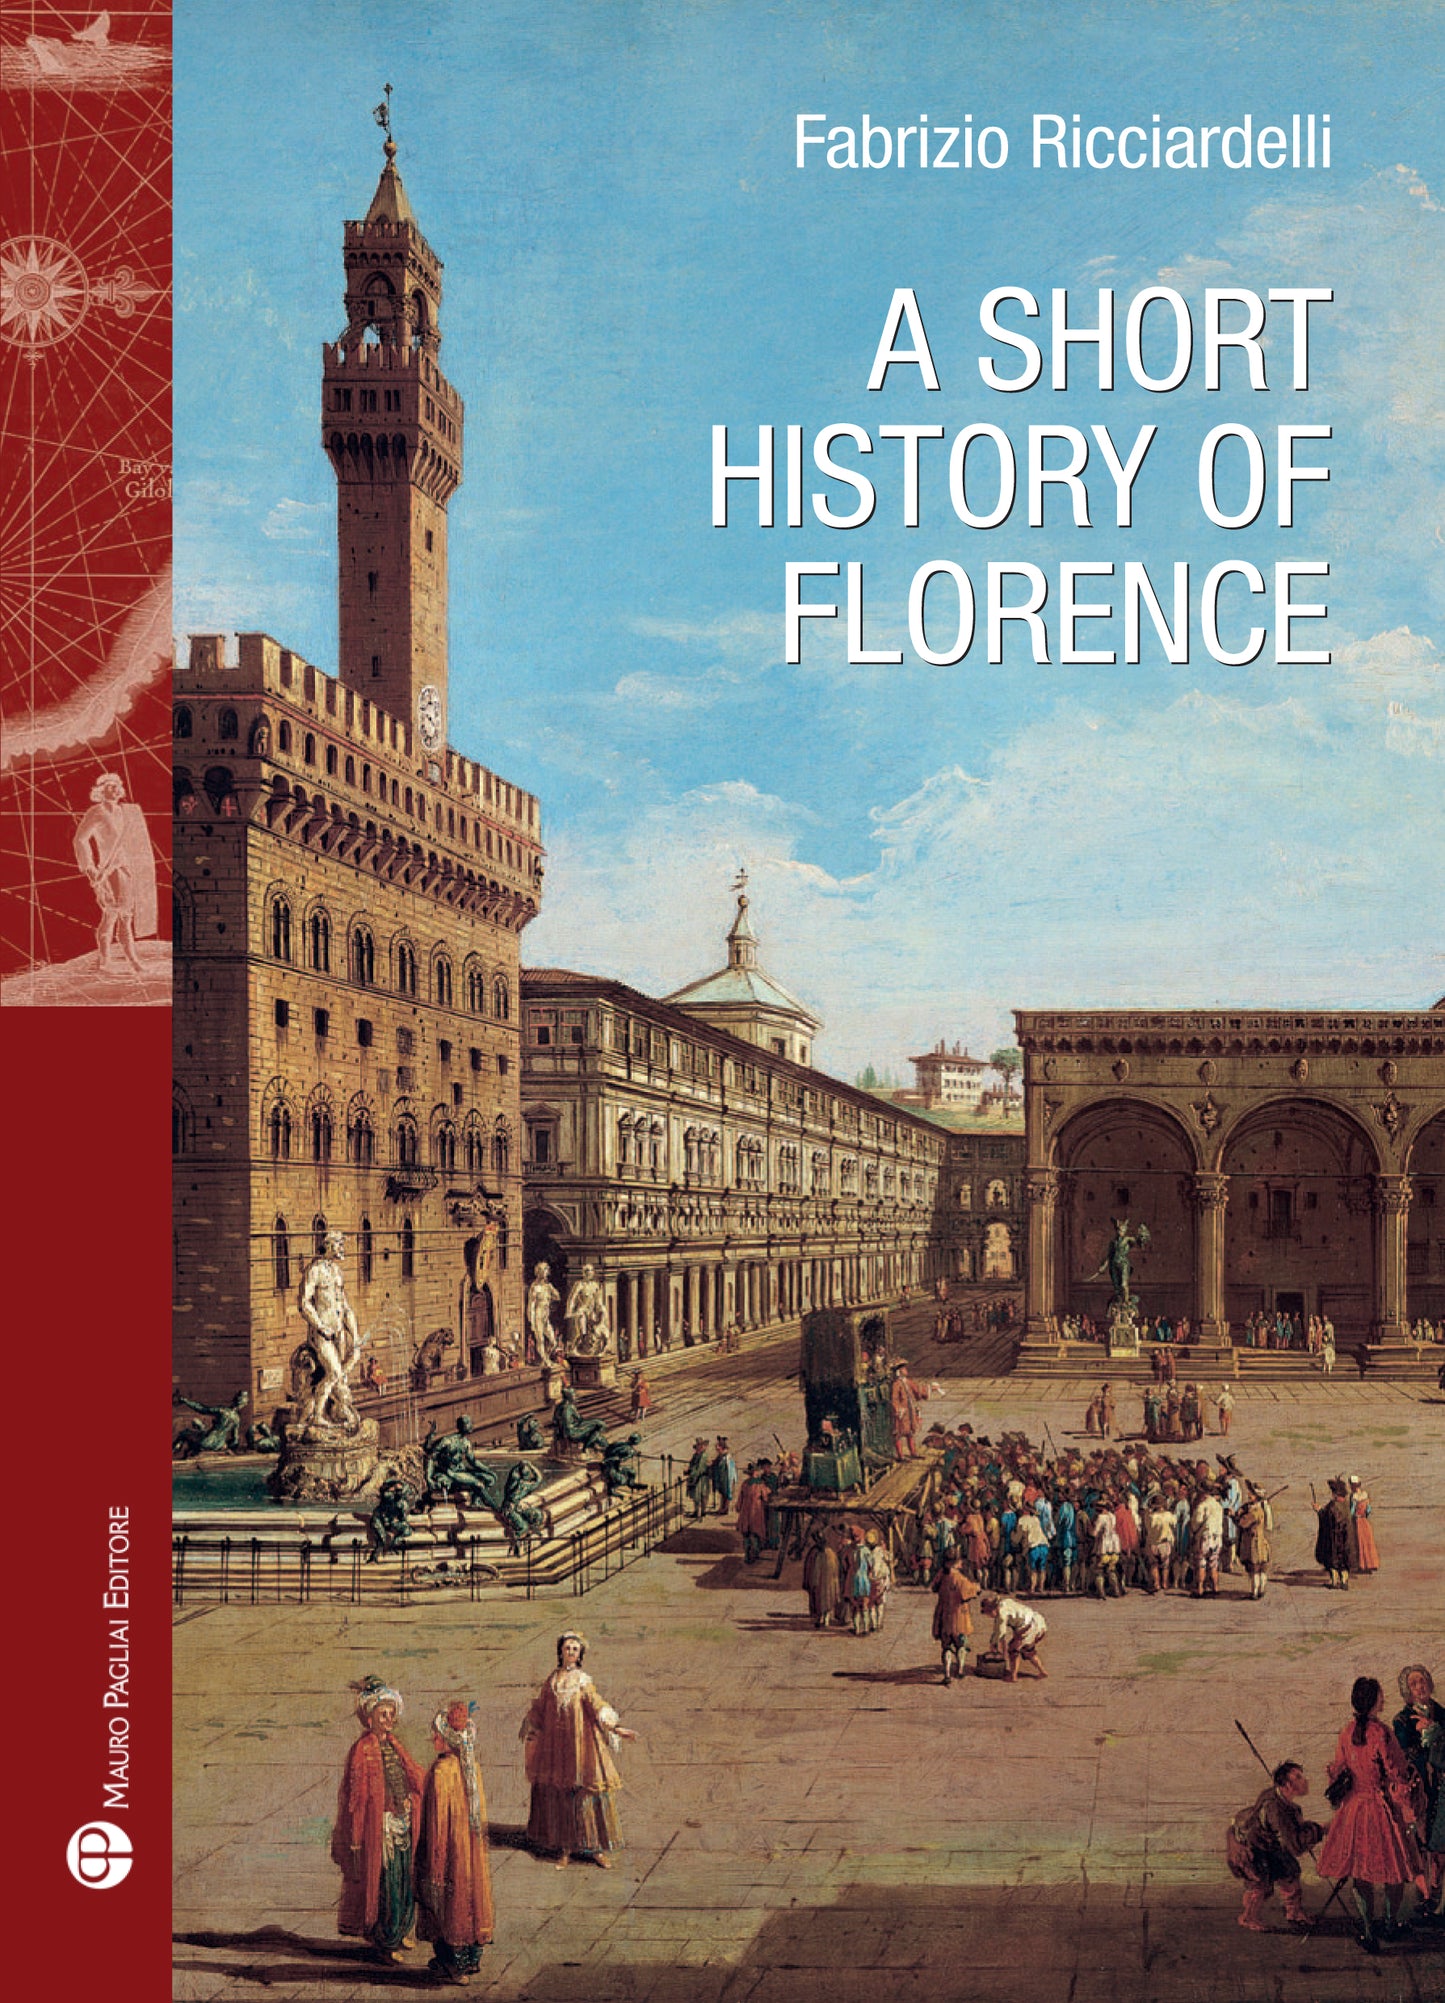 A Short History of Florence